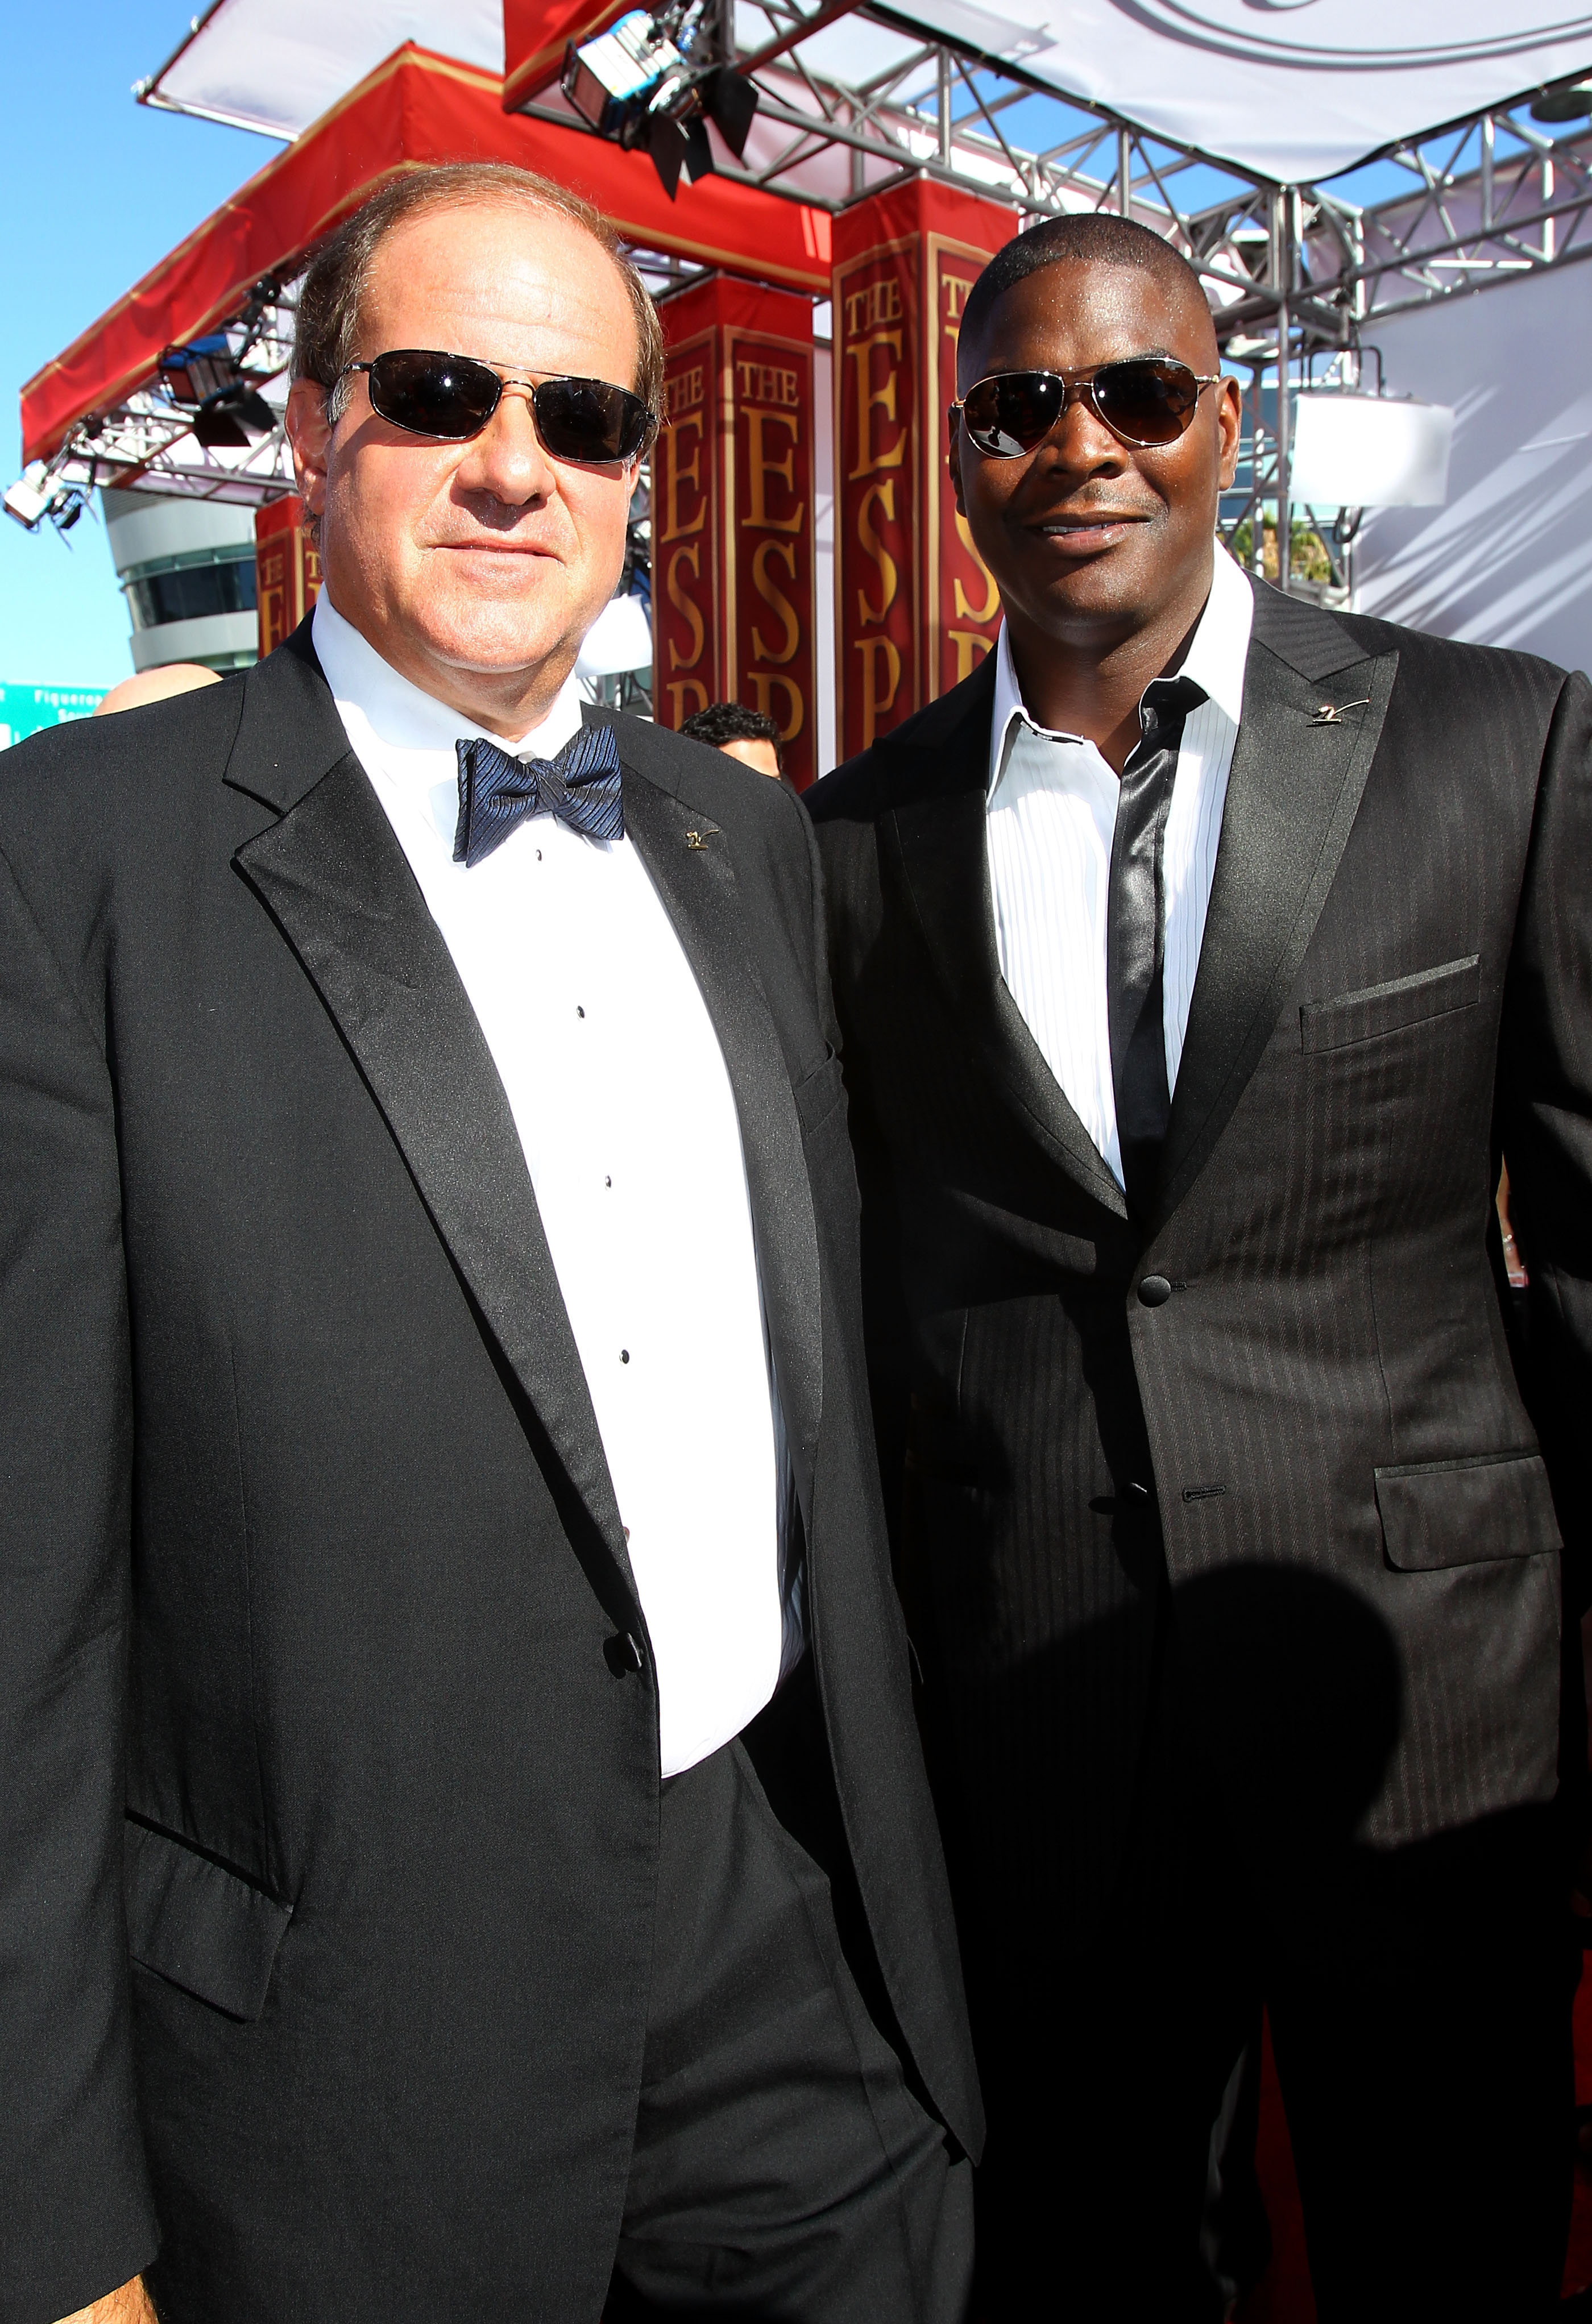 LOS ANGELES, CA - JULY 14:  ESPN talent Chris Berman and Keyshawn Johnson arrive at the 2010 ESPY Awards at Nokia Theatre L.A. Live on July 14, 2010 in Los Angeles, California.  (Photo by Alexandra Wyman/Getty Images for ESPY)